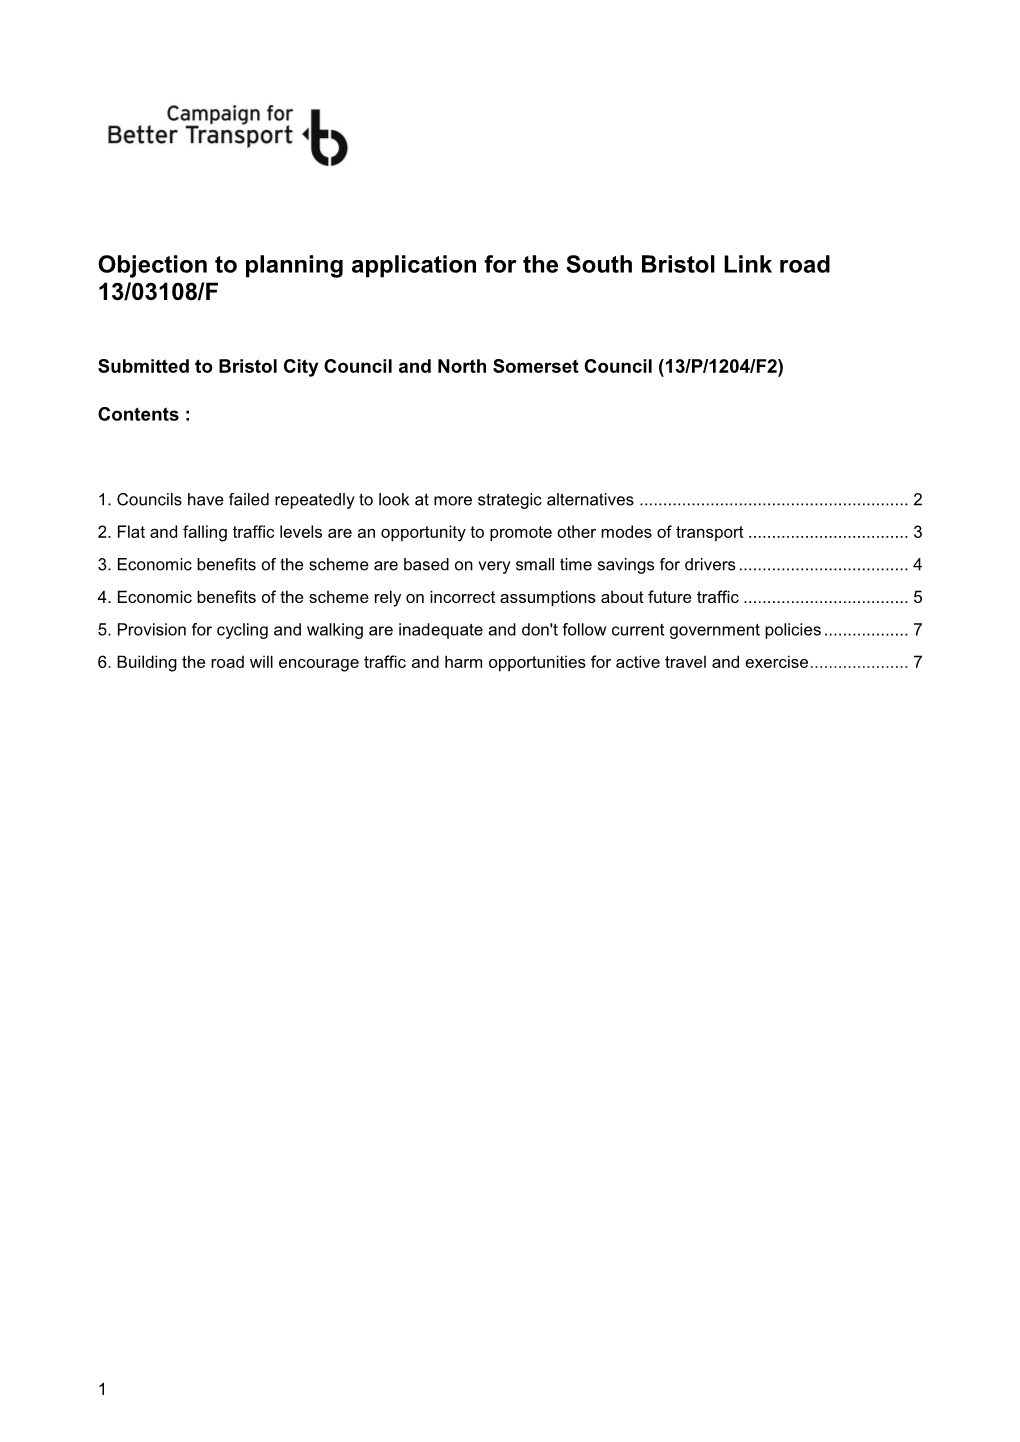 Objection to Planning Application for the South Bristol Link Road 13/03108/F